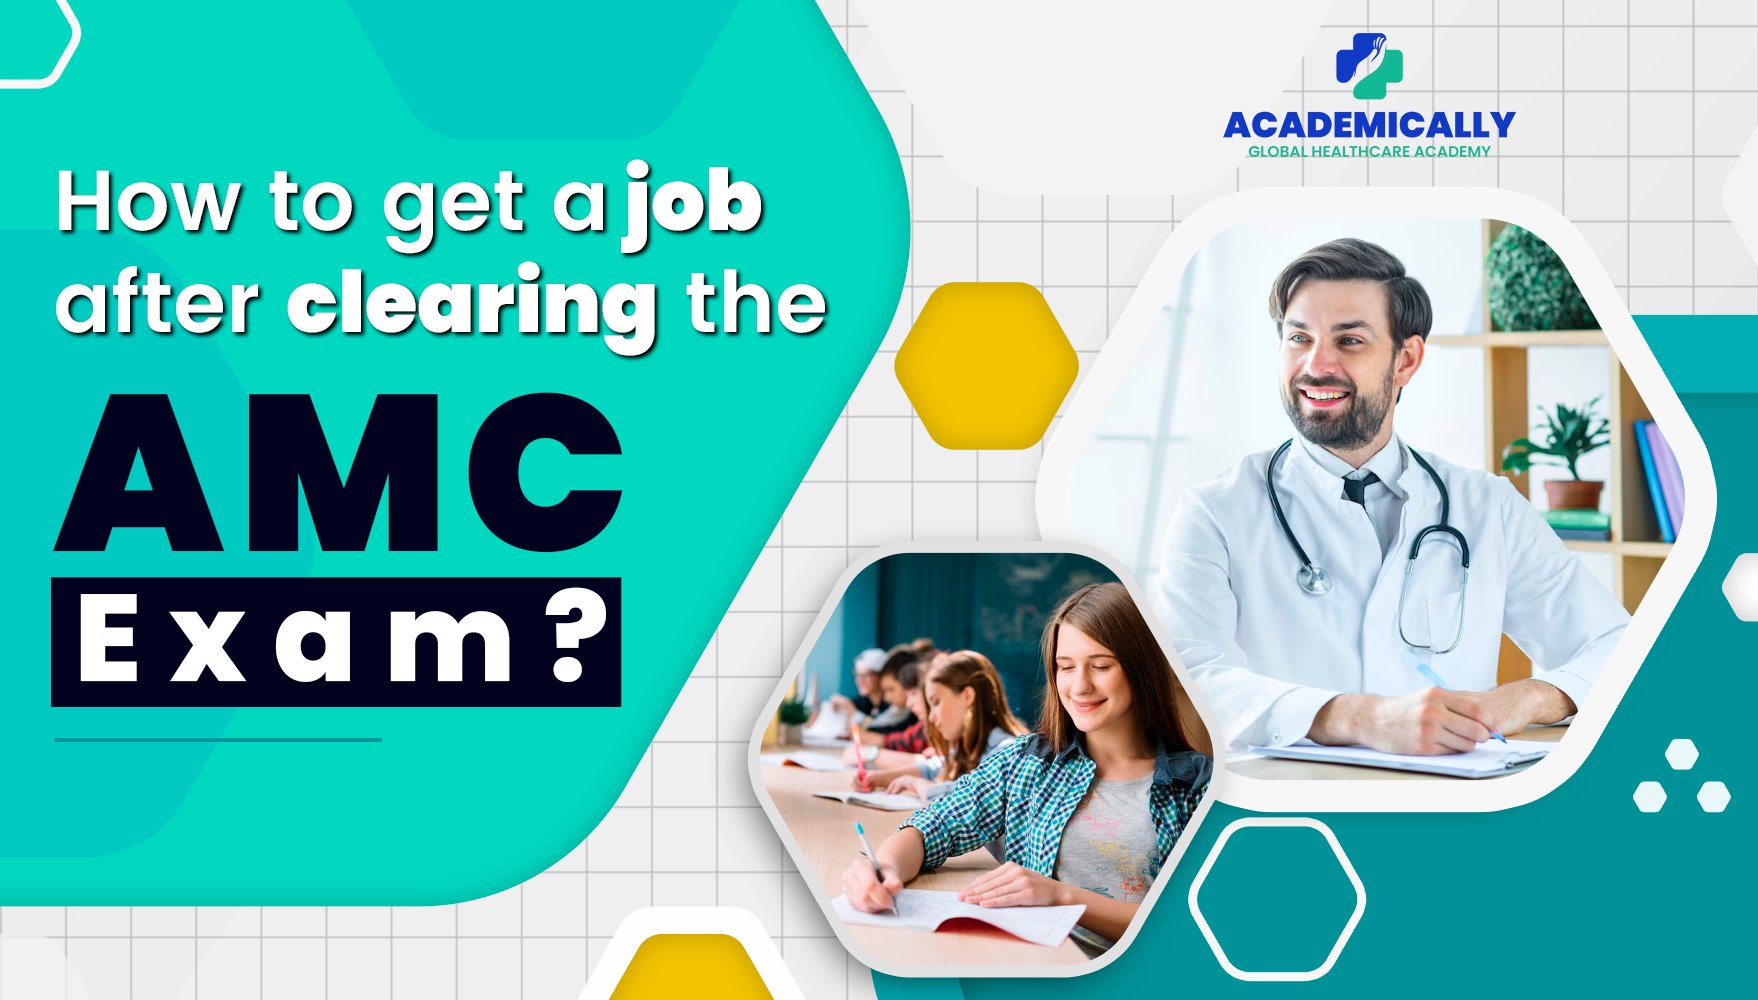 Job Opportunities After Clearing AMC Exams